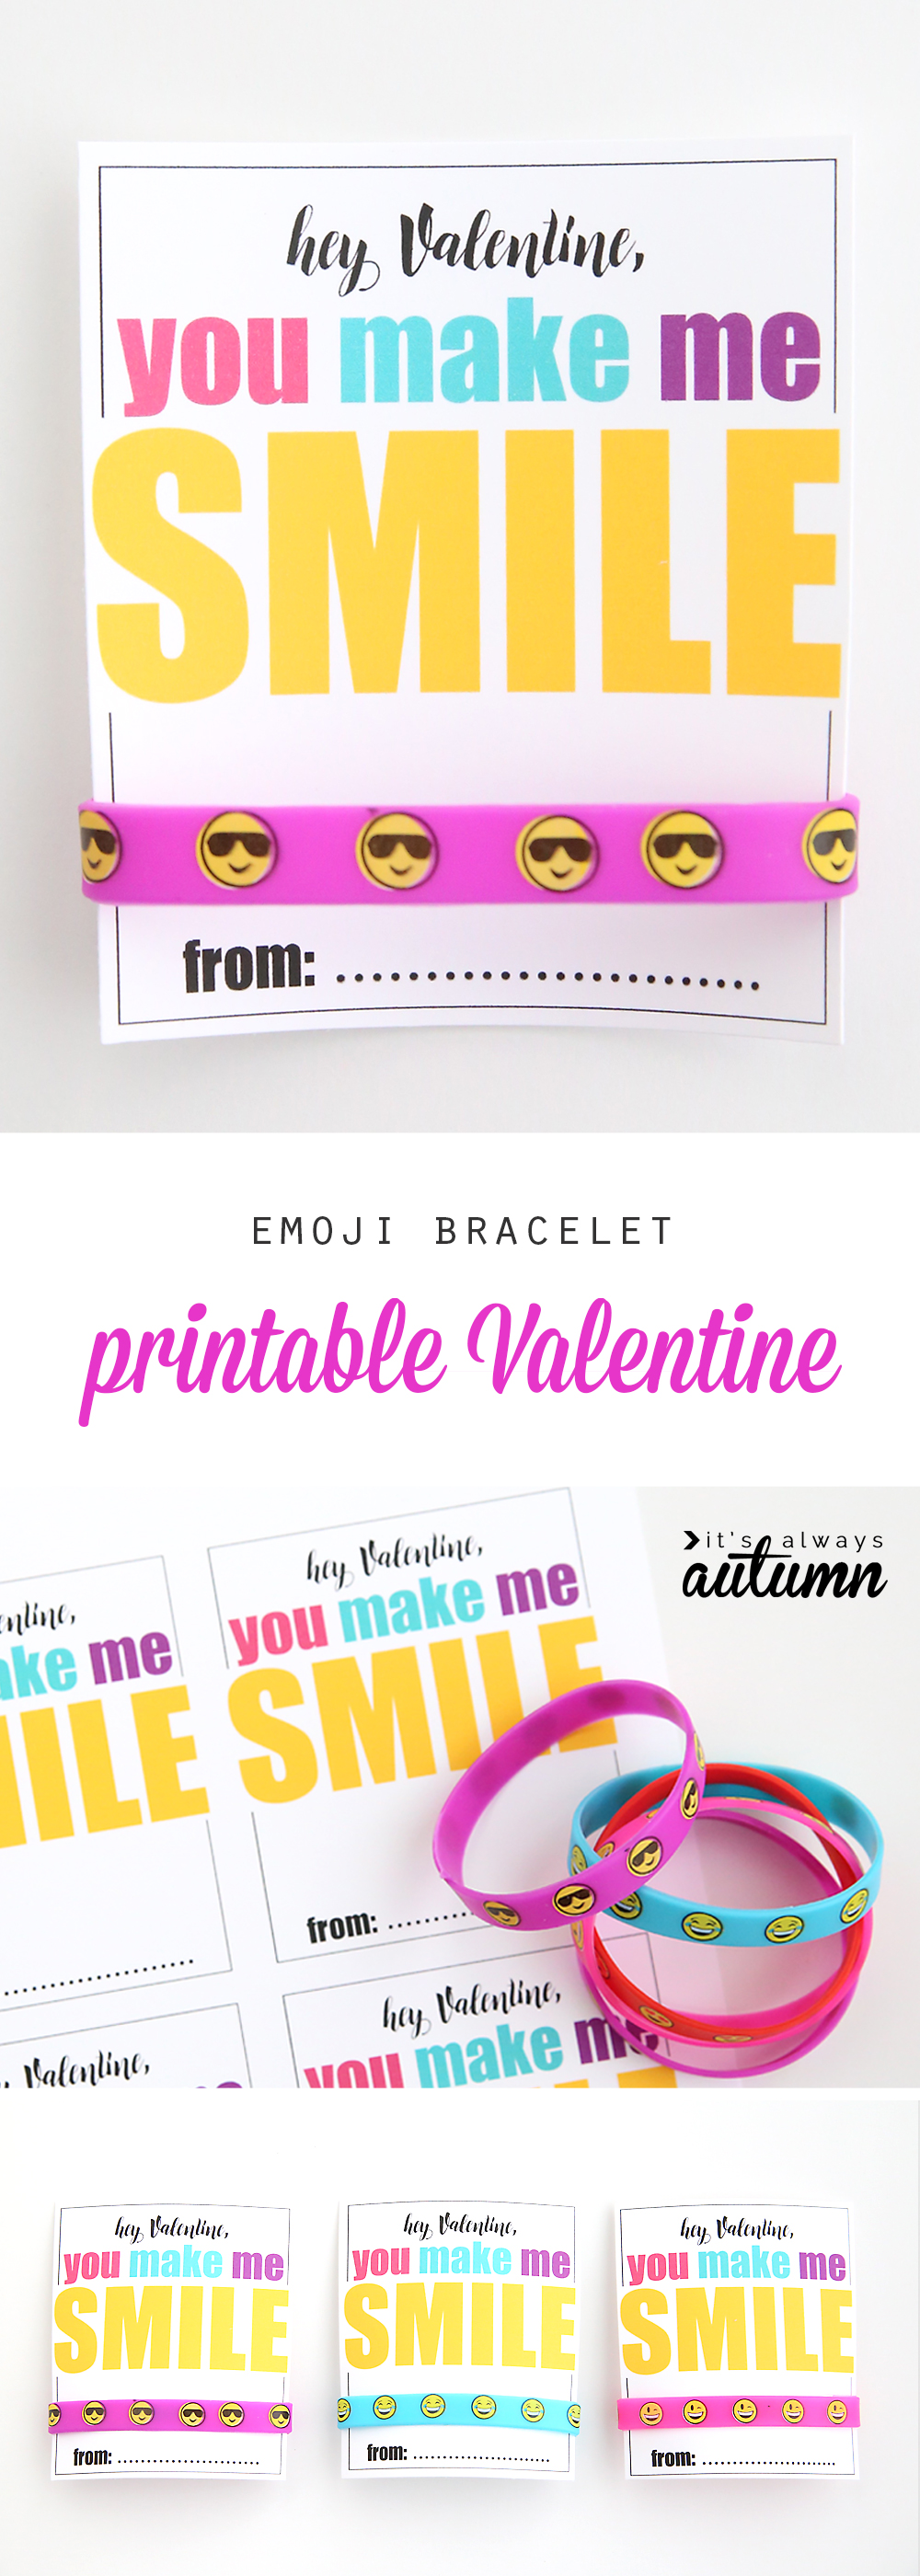 DIY Paper Bracelets Printable Template - Valentines day project for kids -  YouTube